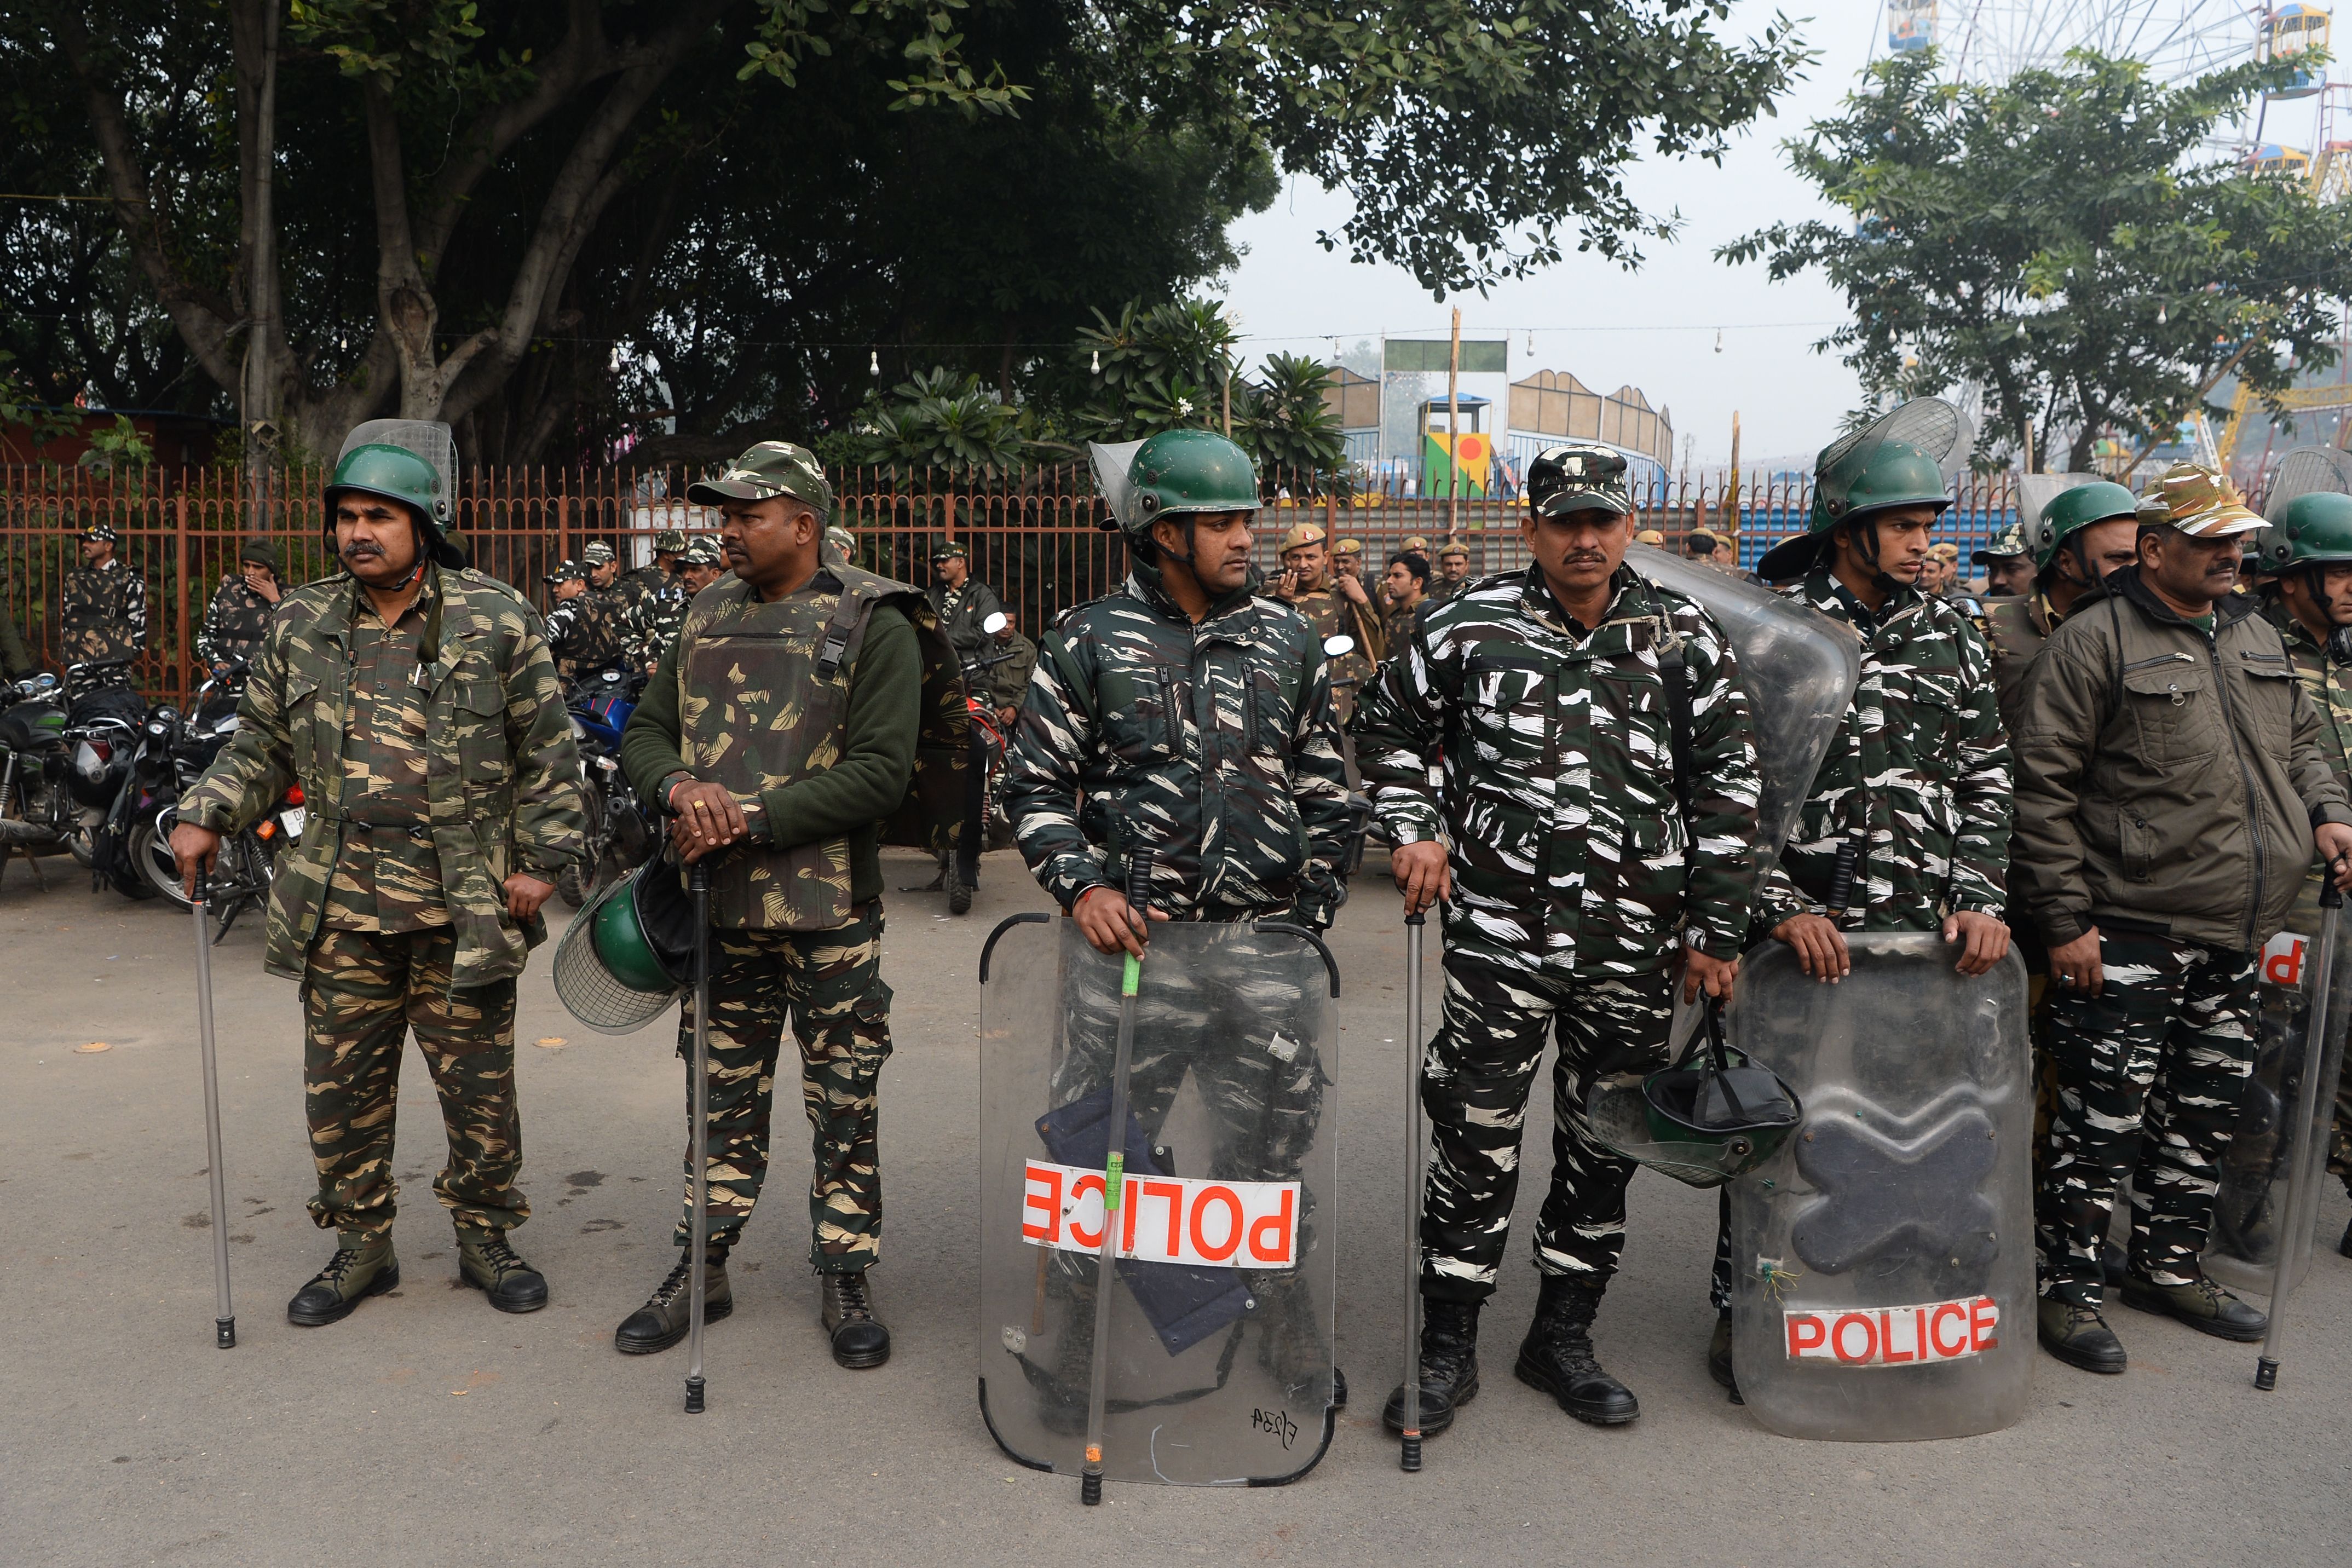 Police and security forces gather near Red Fort, New Delhi, at a demonstration on December 19, 2019.